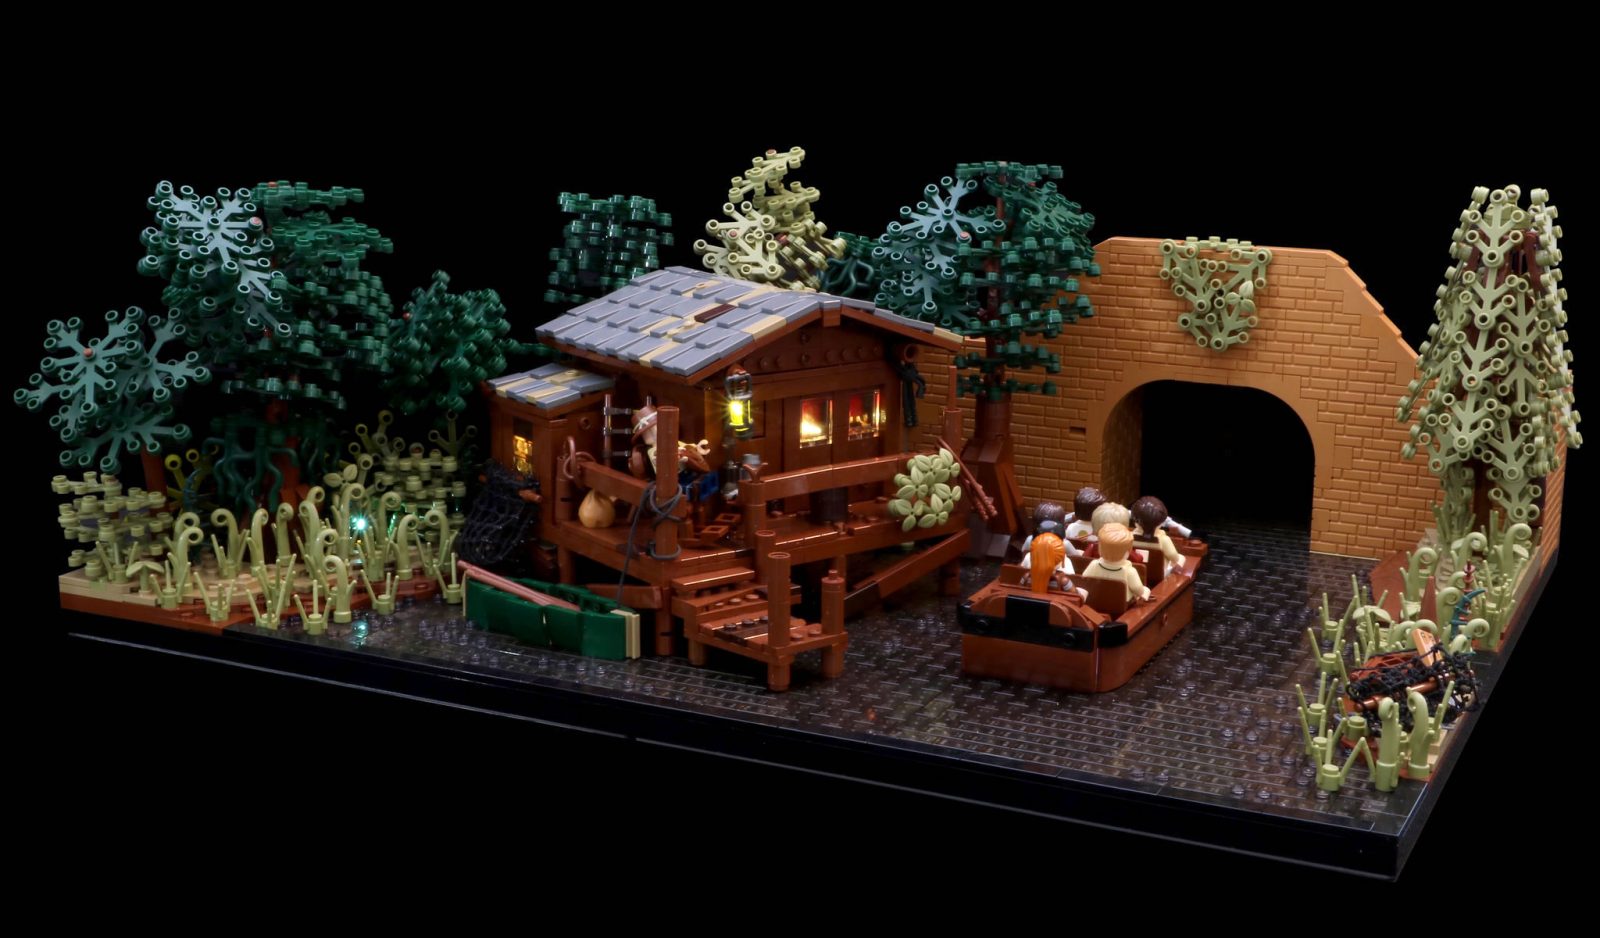 LEGO depiction of the Pirates of the Carribean Ride Disneyland - Blue Bayou